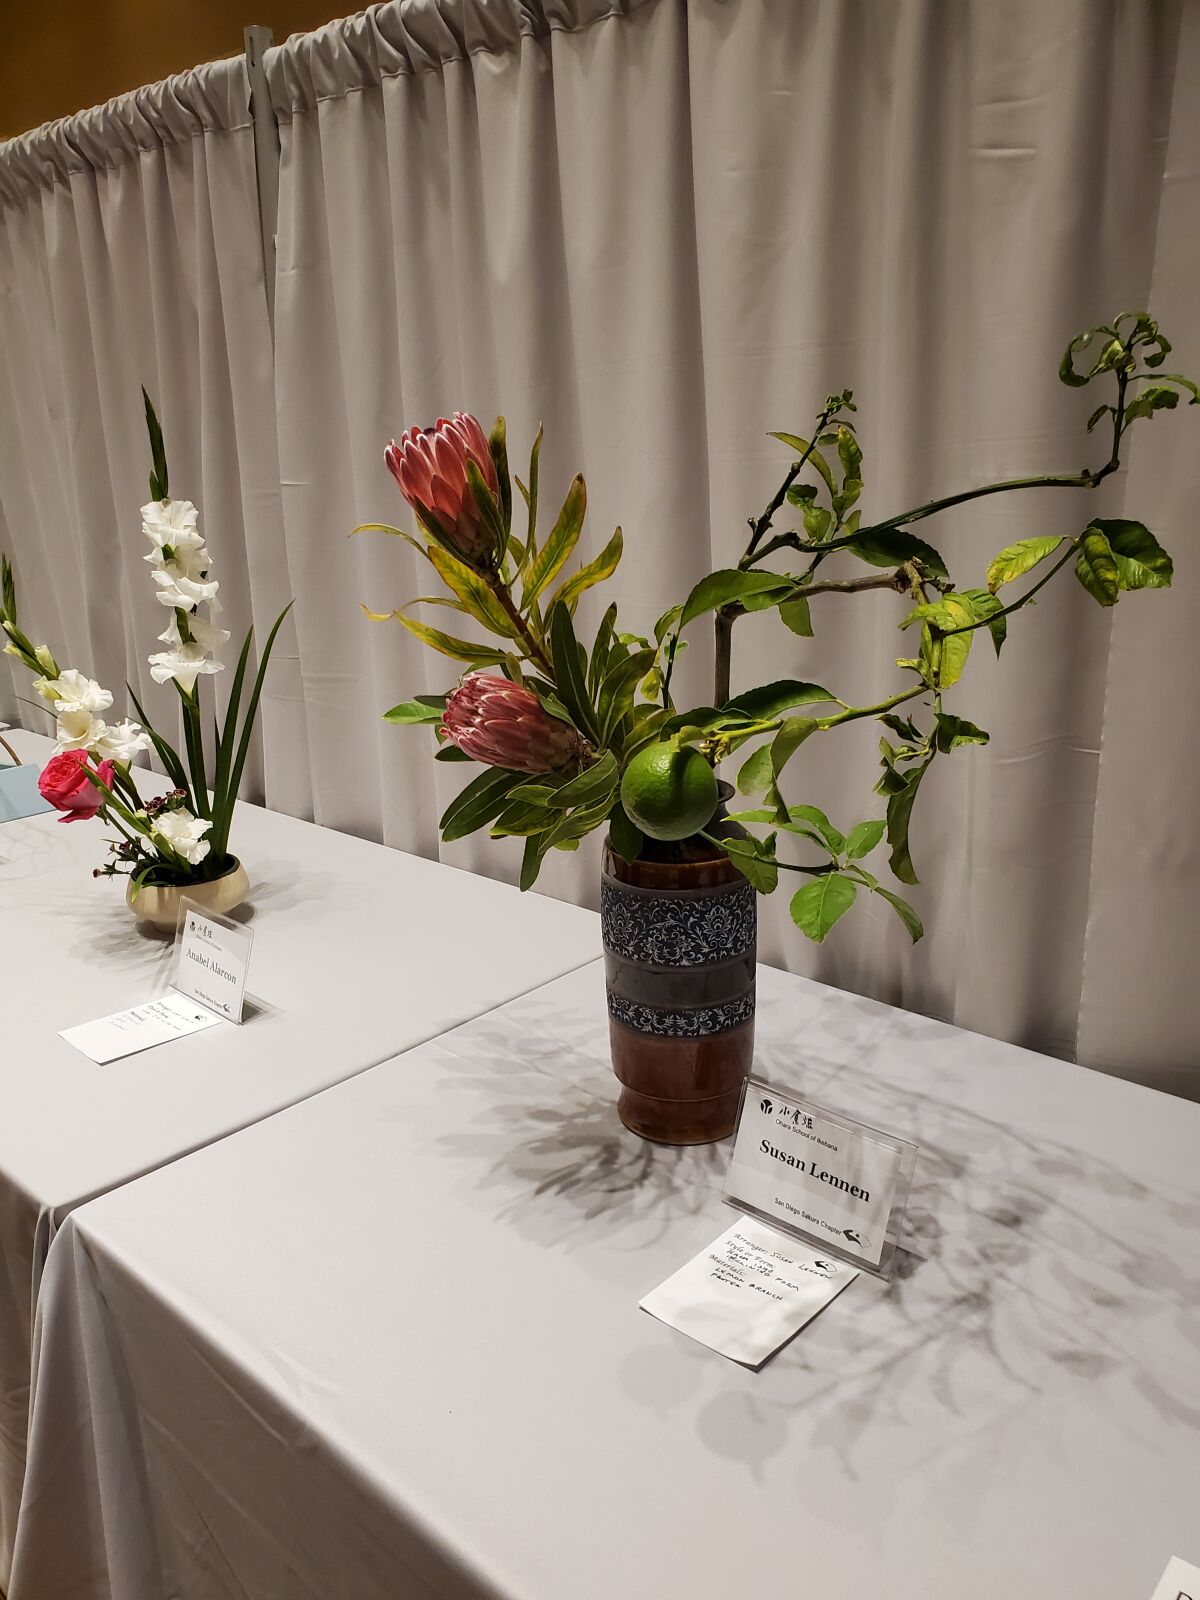 Works of ikebana flower arranging that were on display at the La Jolla/Riford Library on Oct. 21-22.